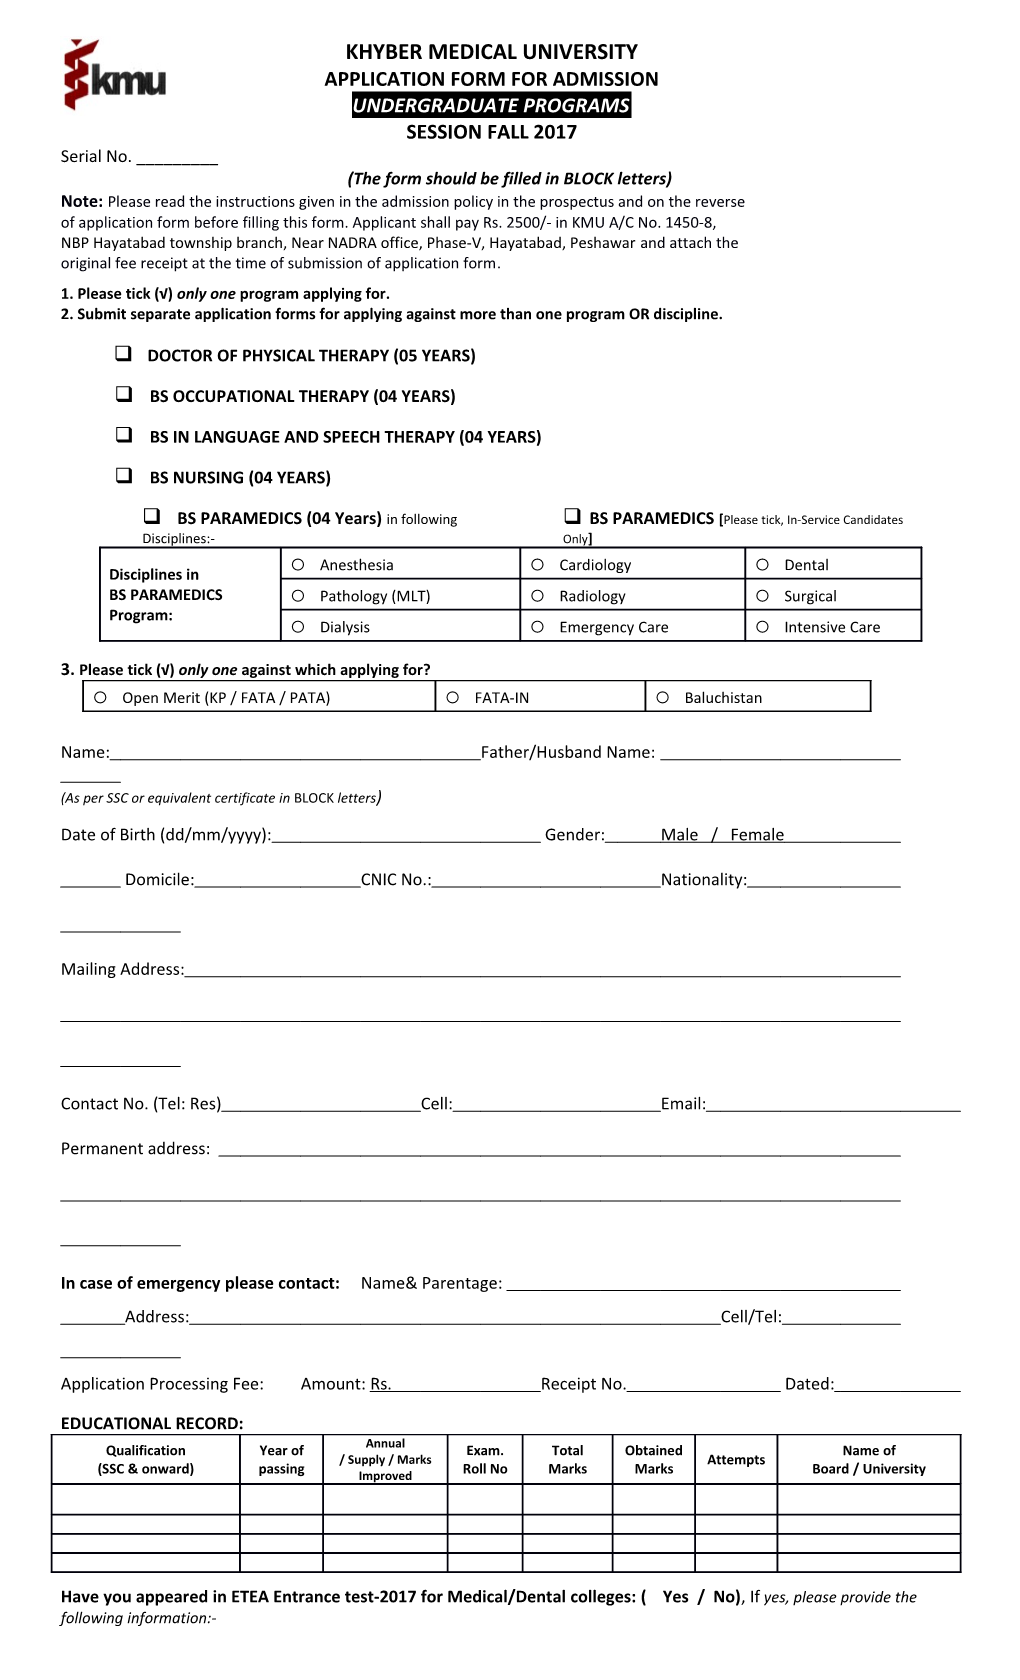 The Form Should Be Filled in BLOCK Letters